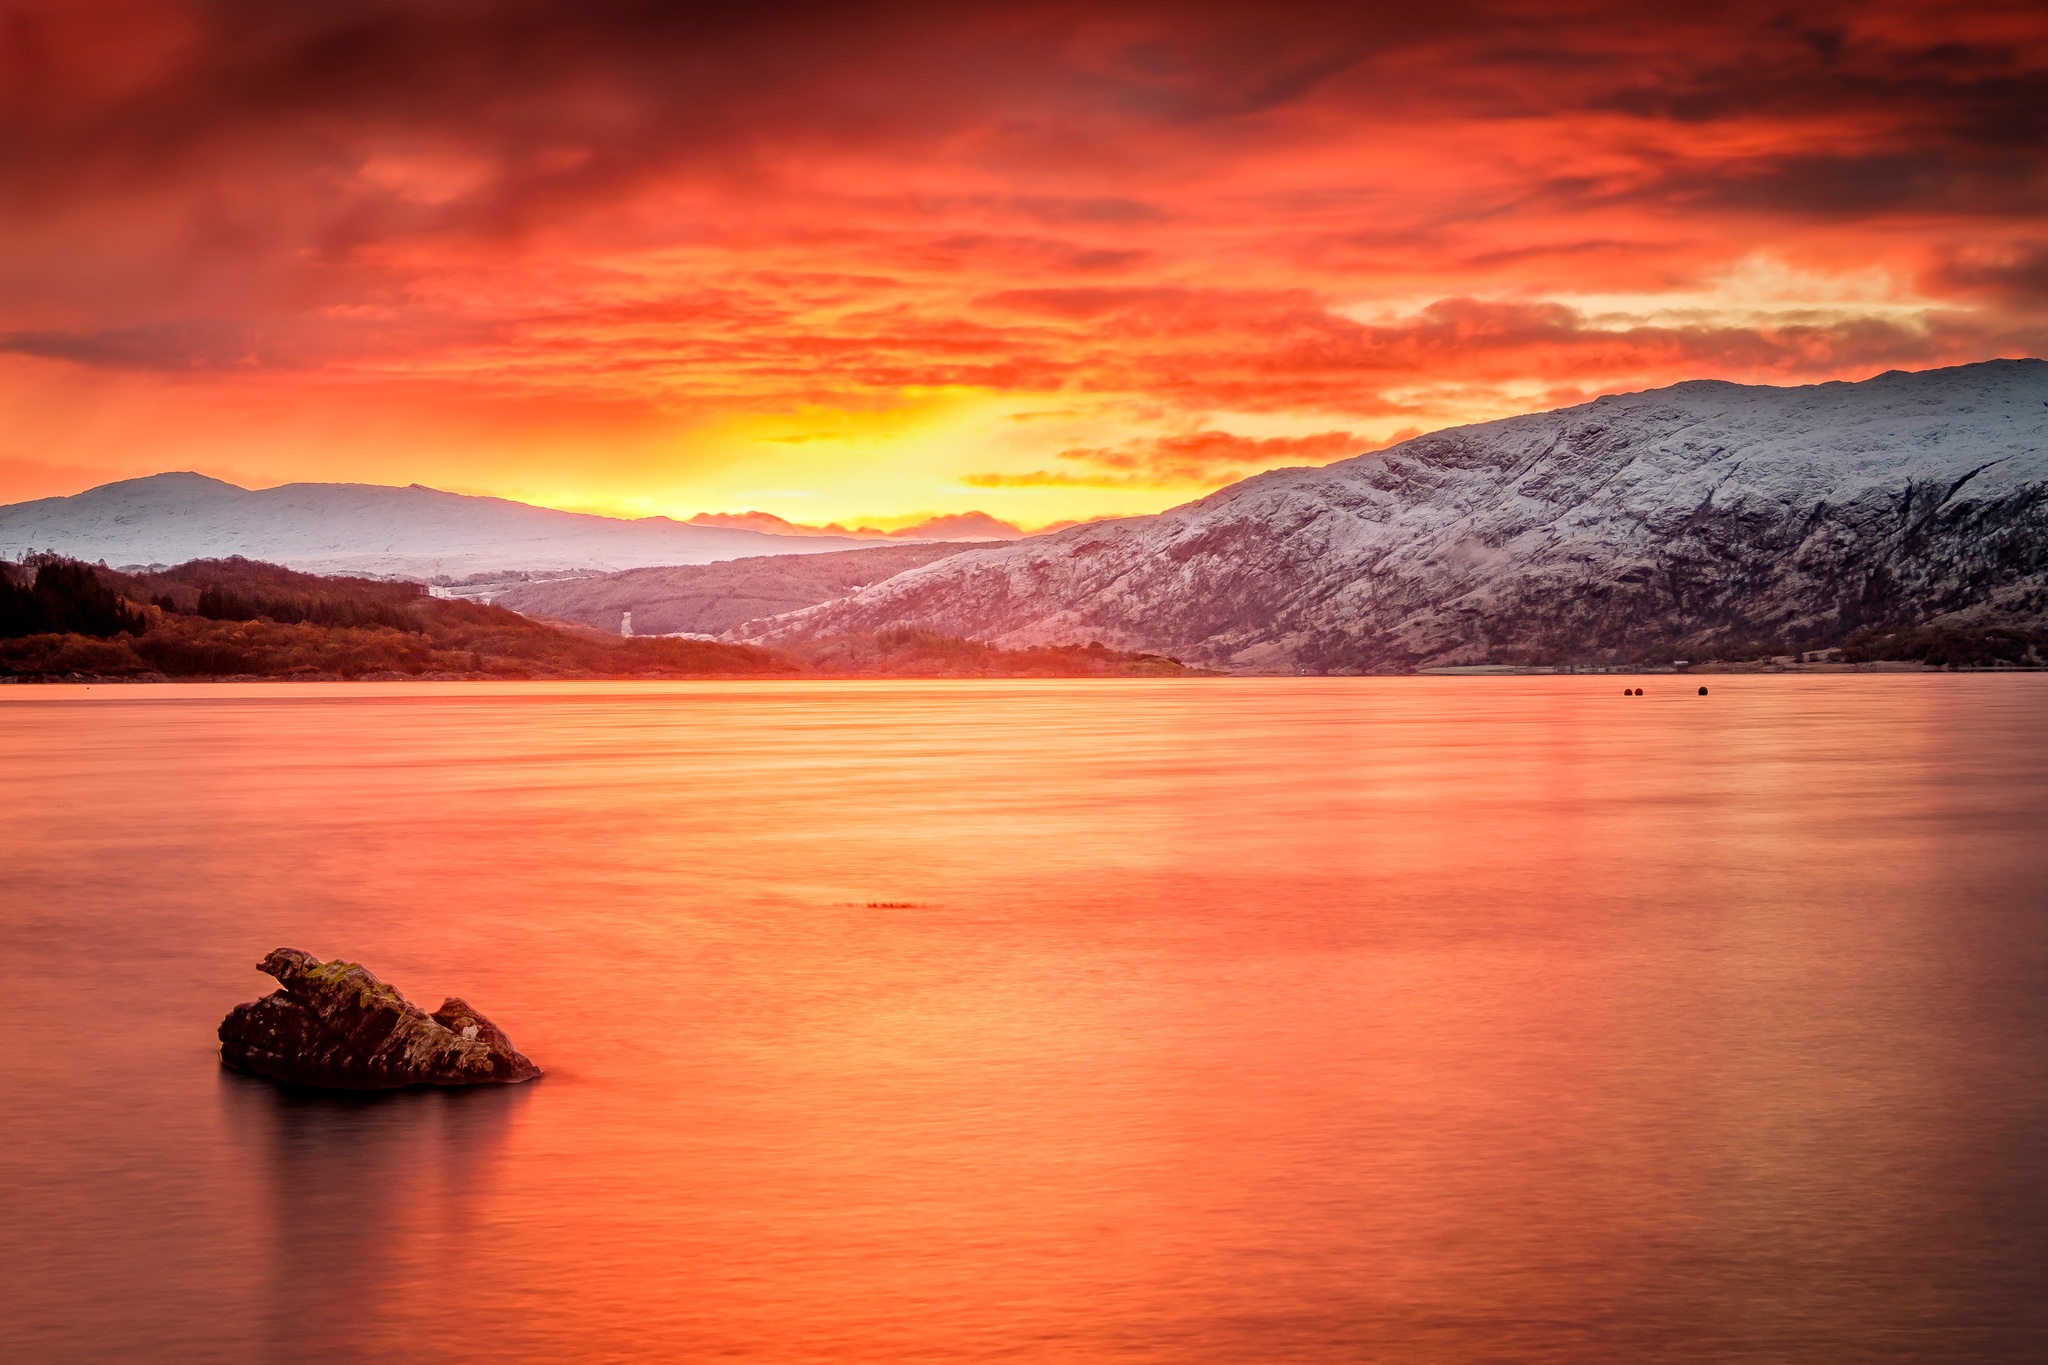 The light from a spectacular early winter sunrise over the first of the Winter's snow paints the sky and Loch Sunart with shades of red